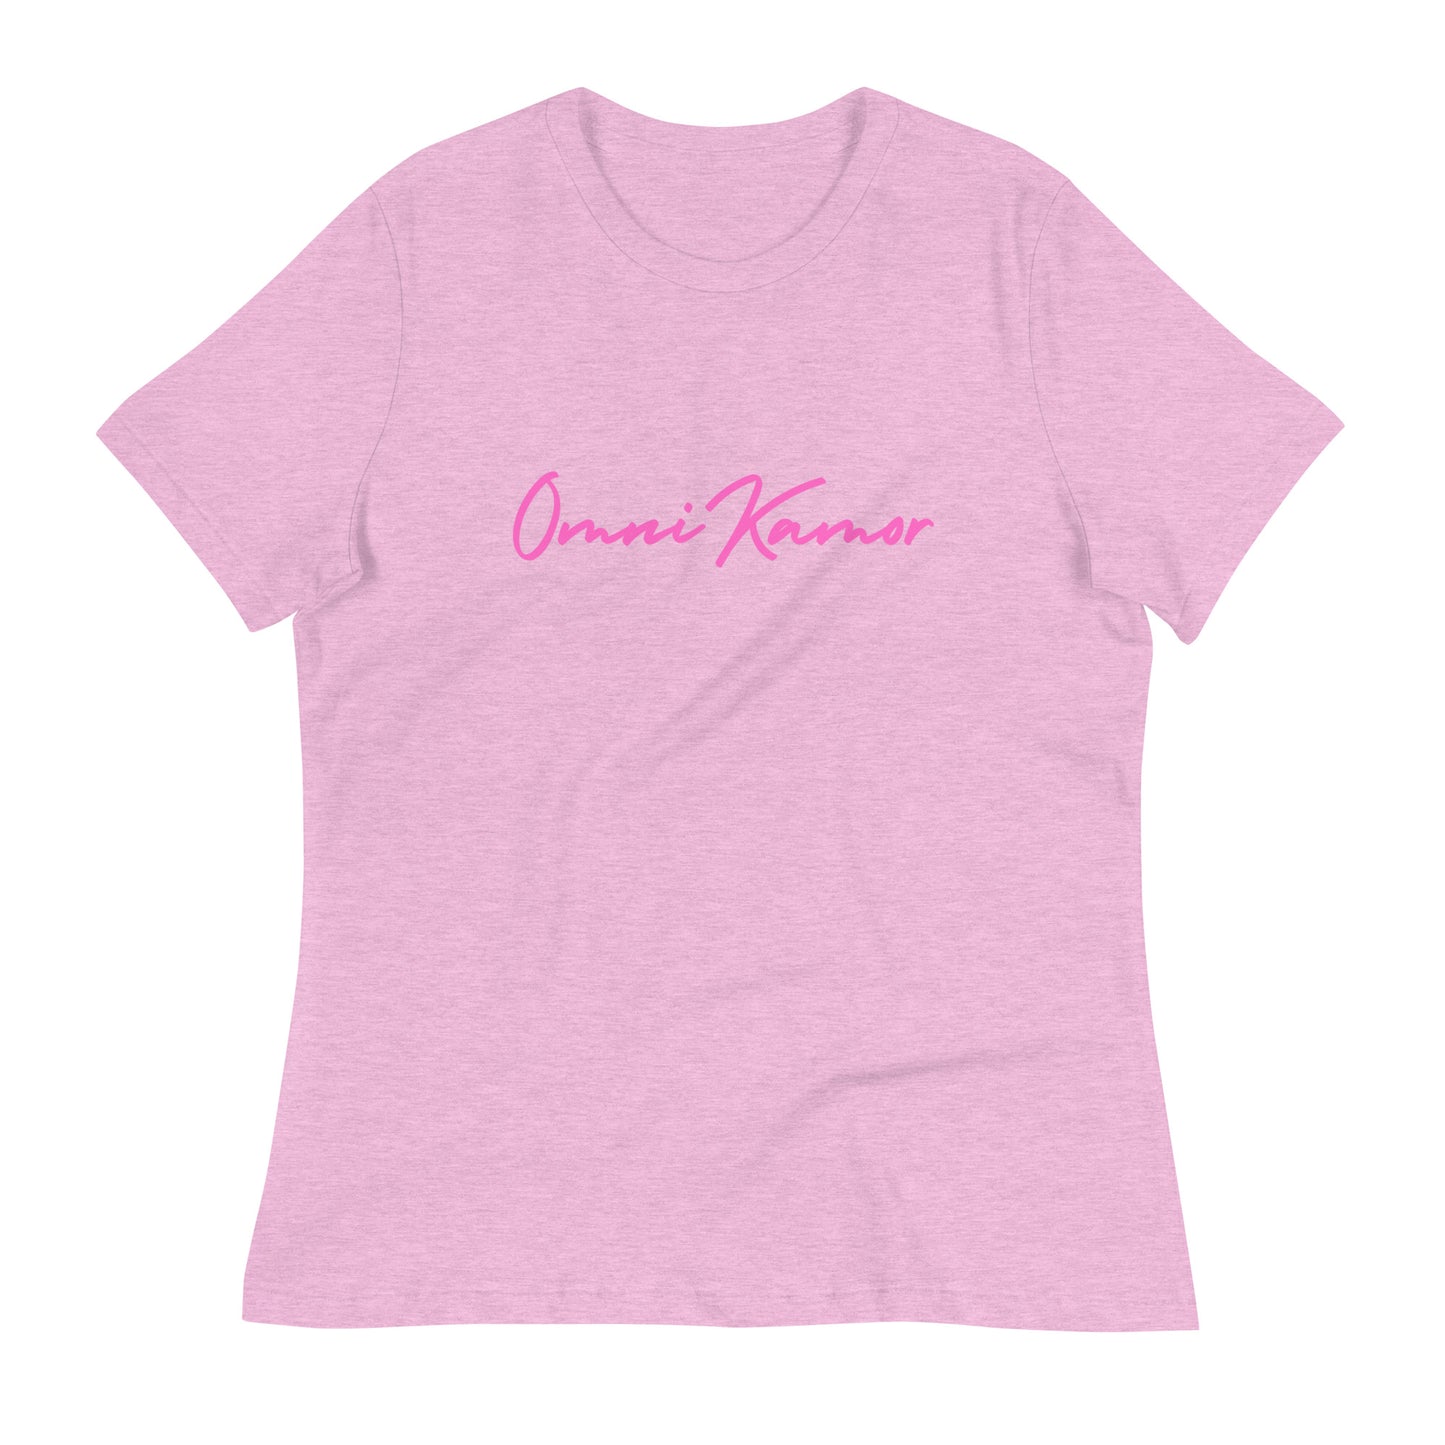 Women's Pink Signature Relaxed T-Shirt Bright Colors